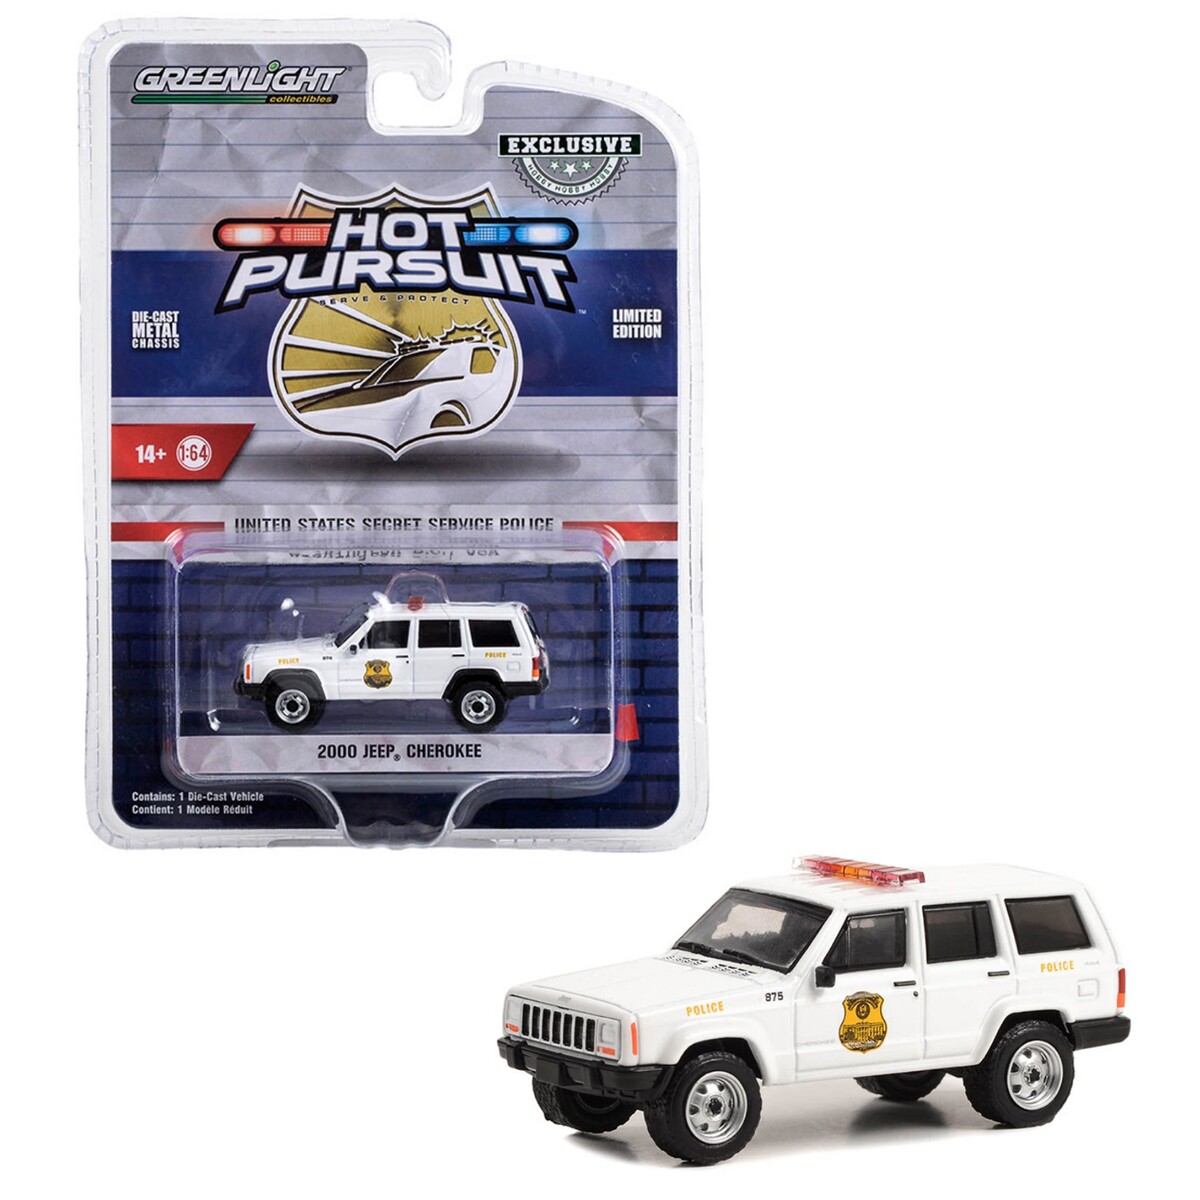 Greenlight 1/64 Hot Pursuit Special Edition - United States Secret Service Police Assortment - 2000 Jeep Cherokee 43015-A - Thumbnail